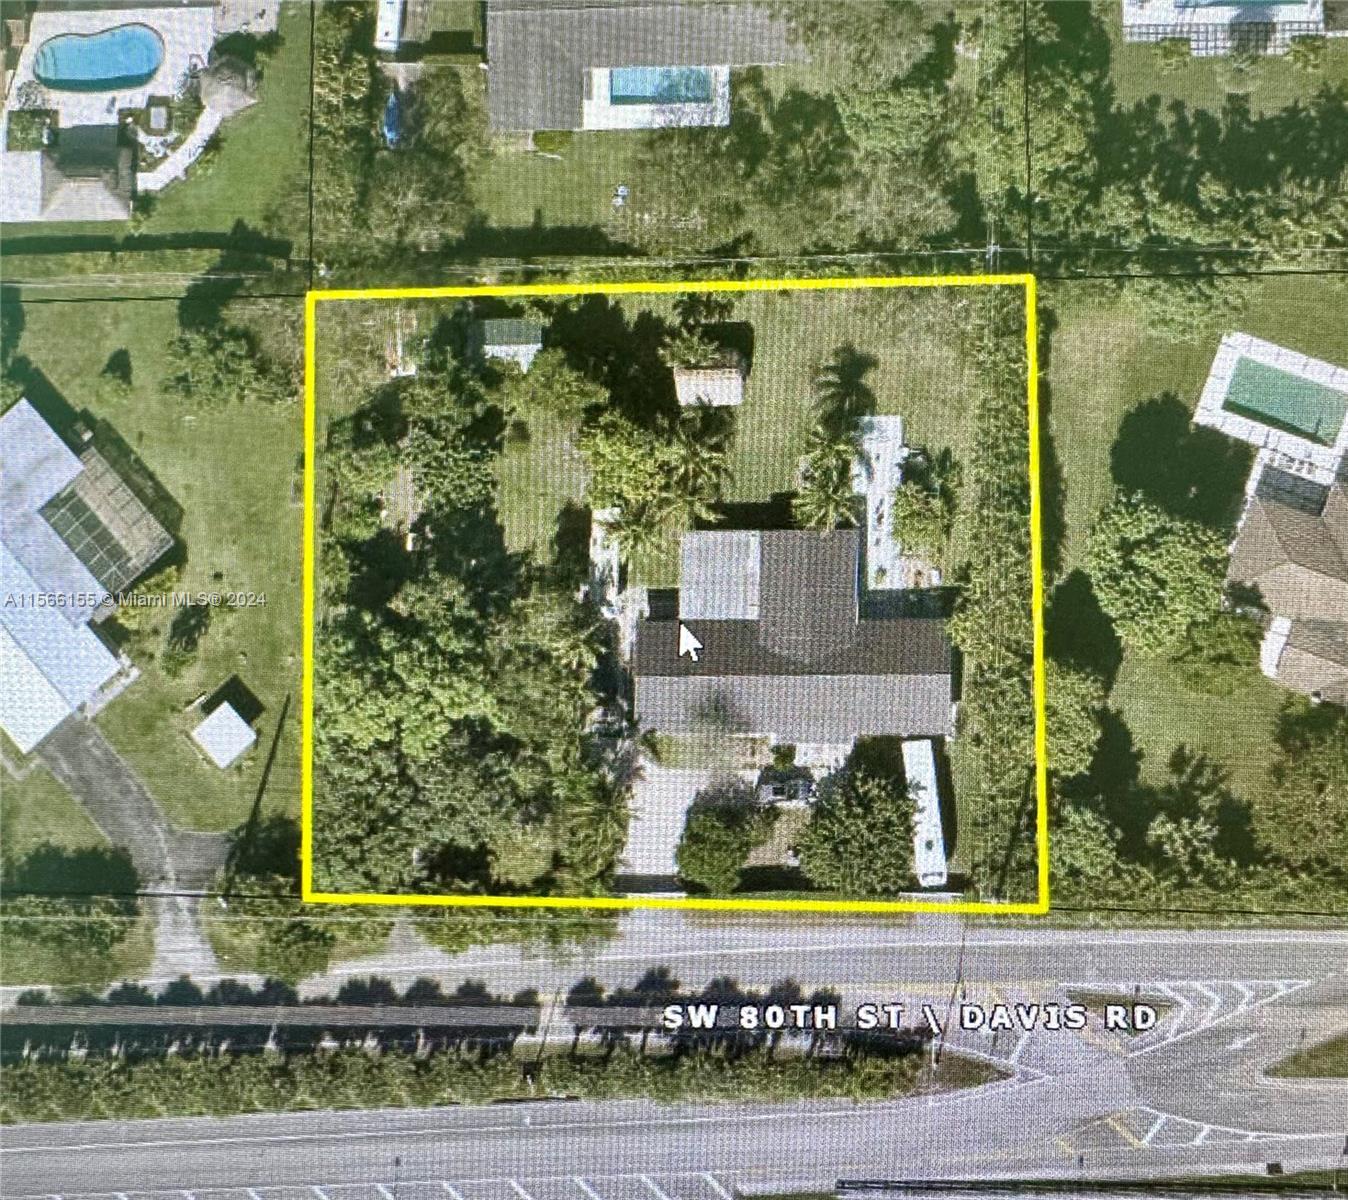 7325 SW 80th St, Miami, Florida 33143, 4 Bedrooms Bedrooms, ,3 BathroomsBathrooms,Residential,For Sale,7325 SW 80th St,A11566155